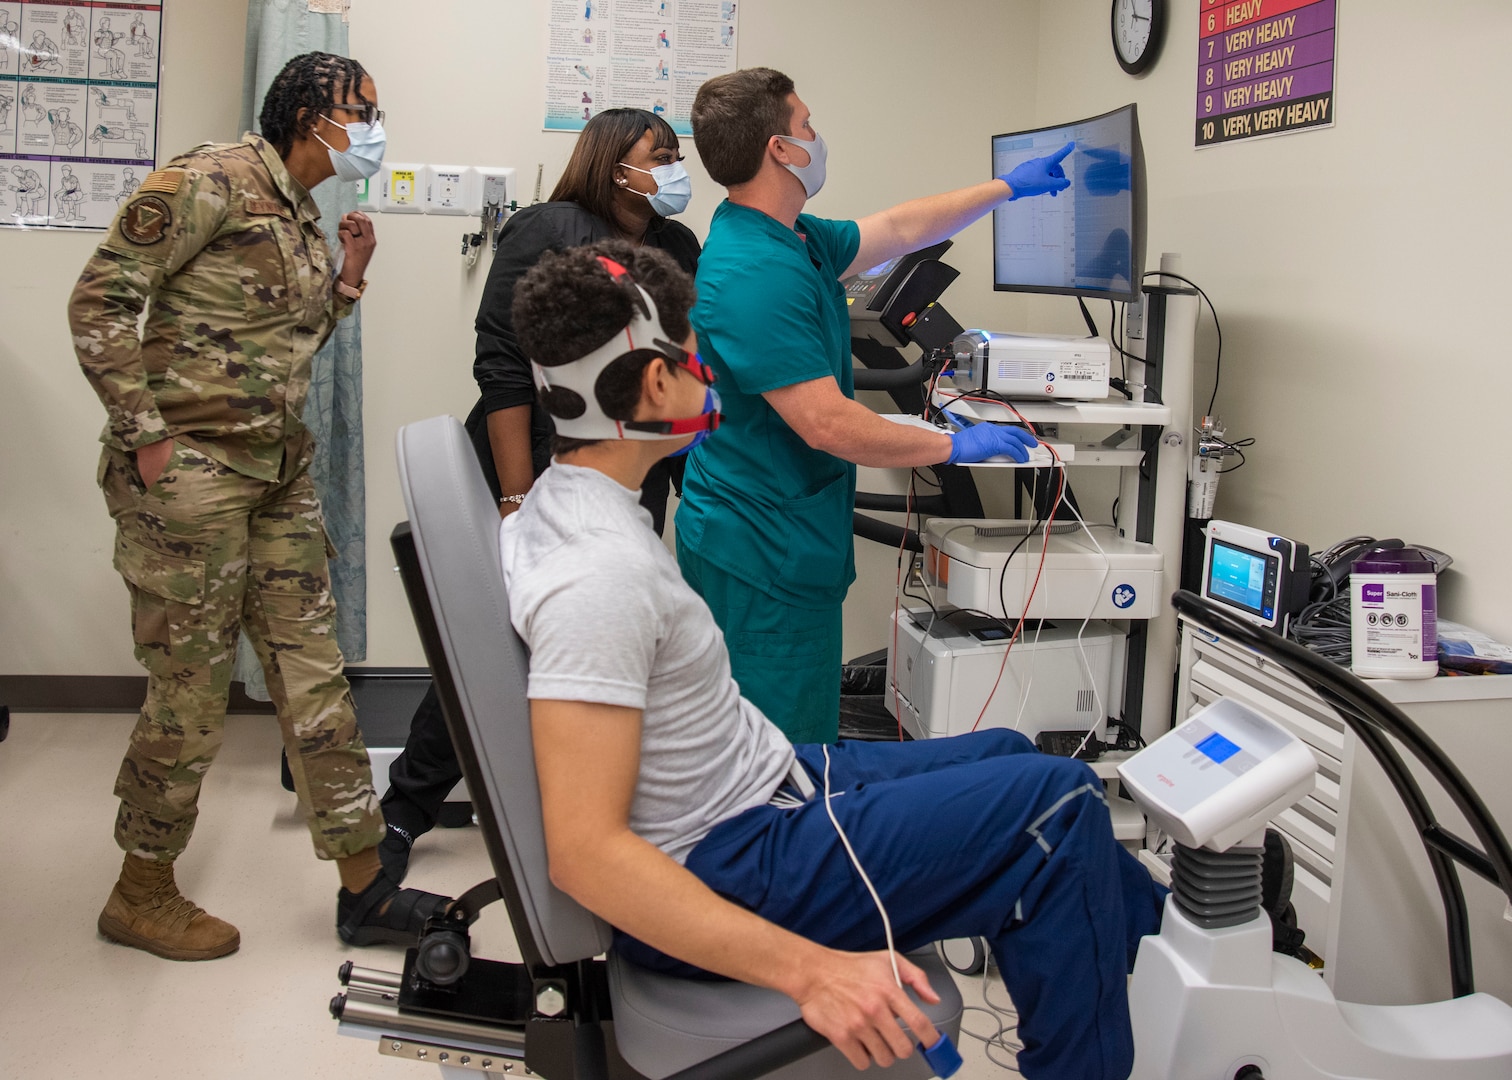 Pulmonary trains with new equipment for a Cardiopulmonary Exercise Test. The CPET is a clinical tool that evaluates exercise capacity and determine cardiac or lung conditions. It assesses the patient's exercise responses involving the pulmonary, cardiovascular and skeletal muscle systems.